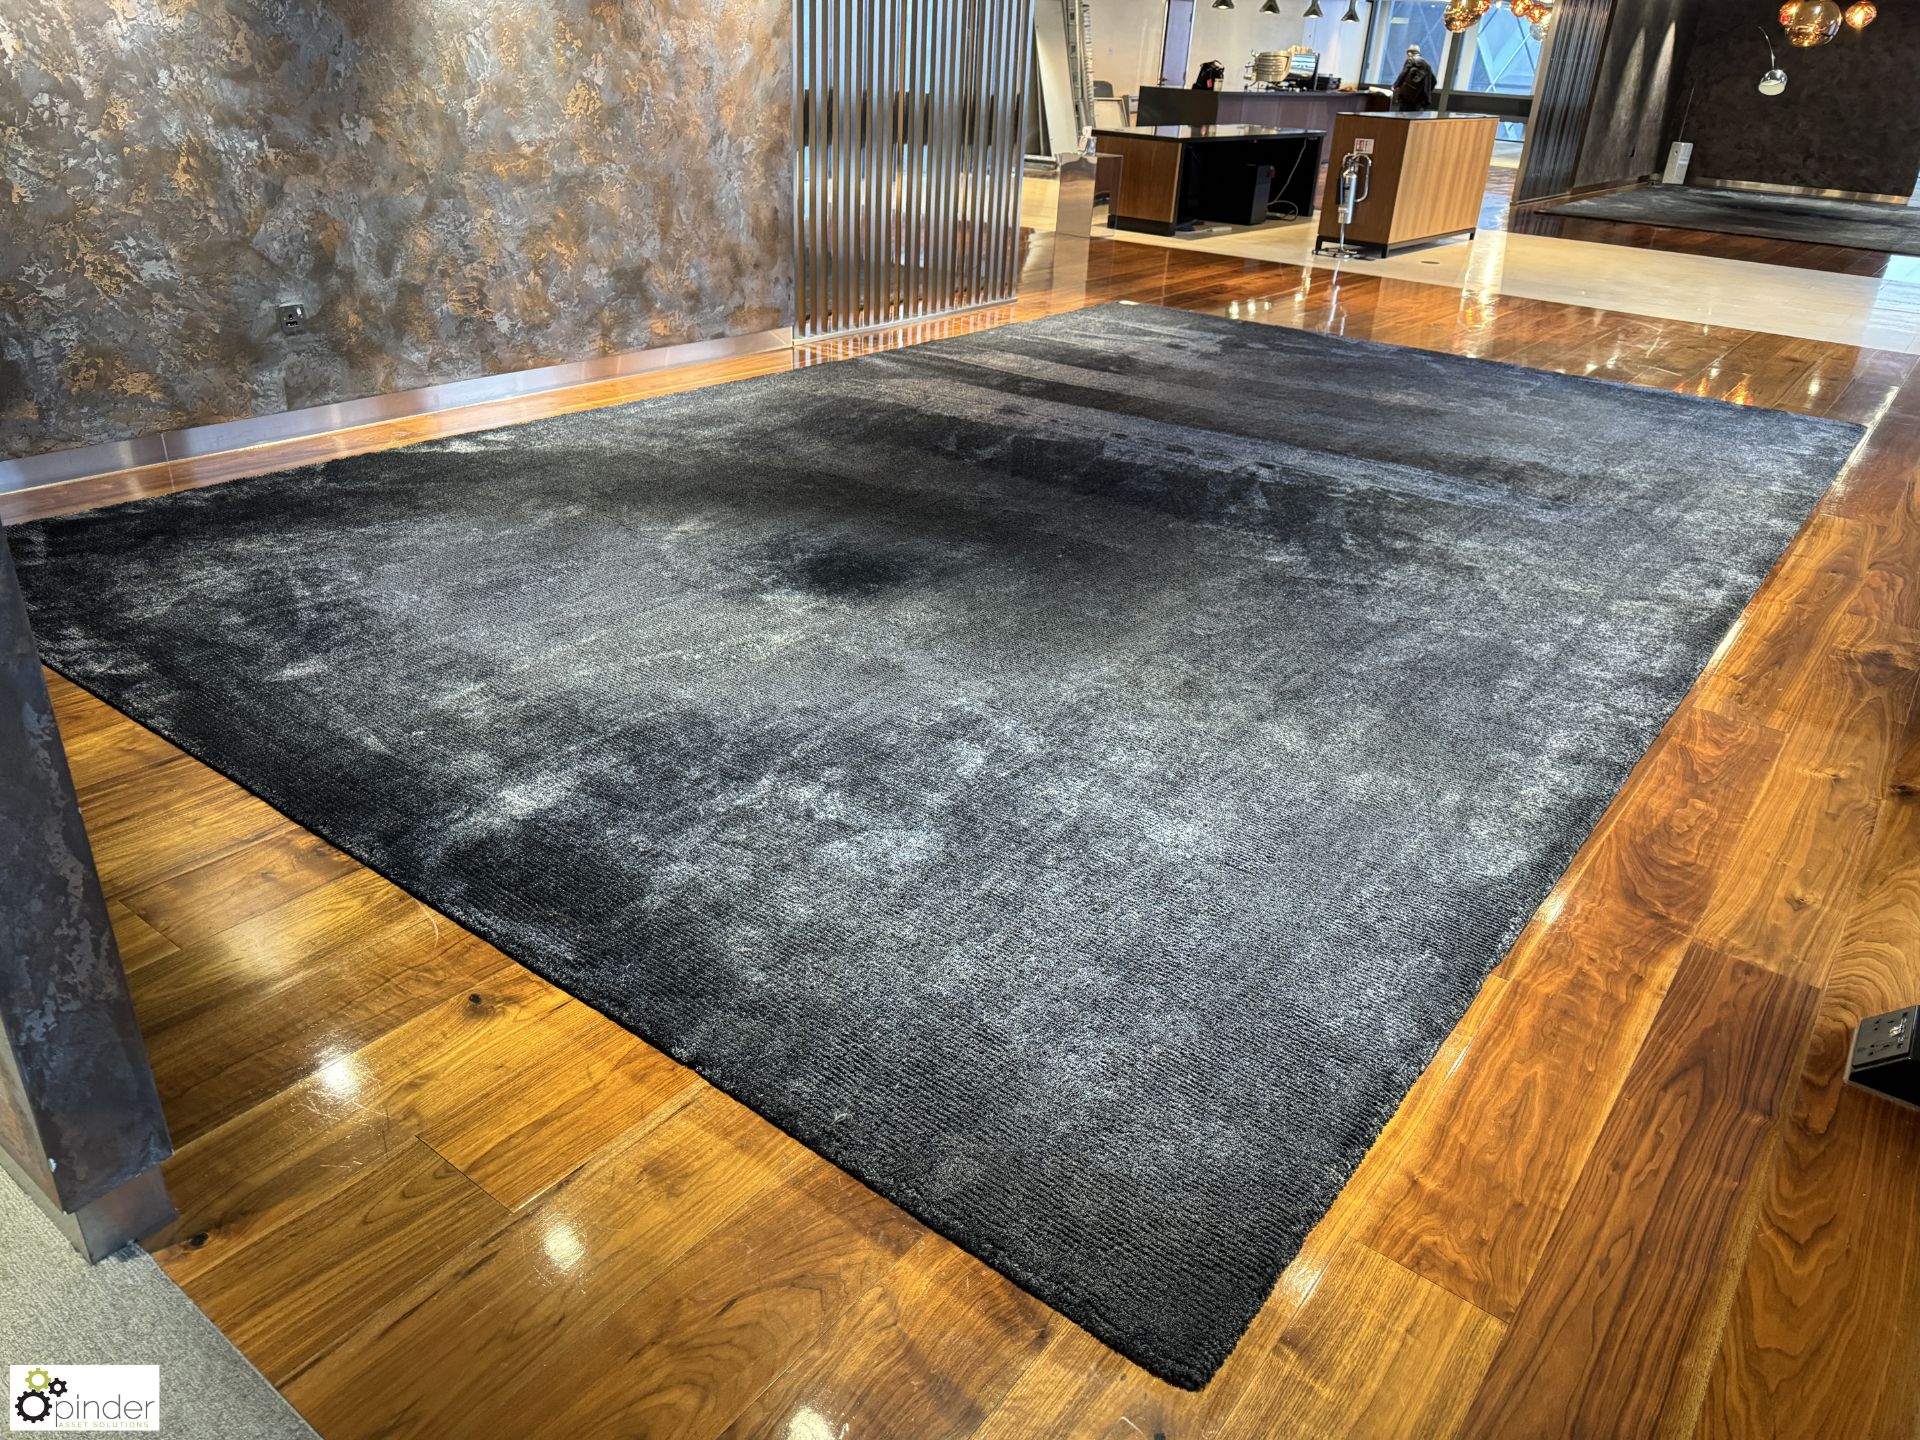 BIC Luxury Rug “Shadow 1483 Ivory Black”, 6450mm x 4000mm (location in building – level 22) - Image 3 of 6